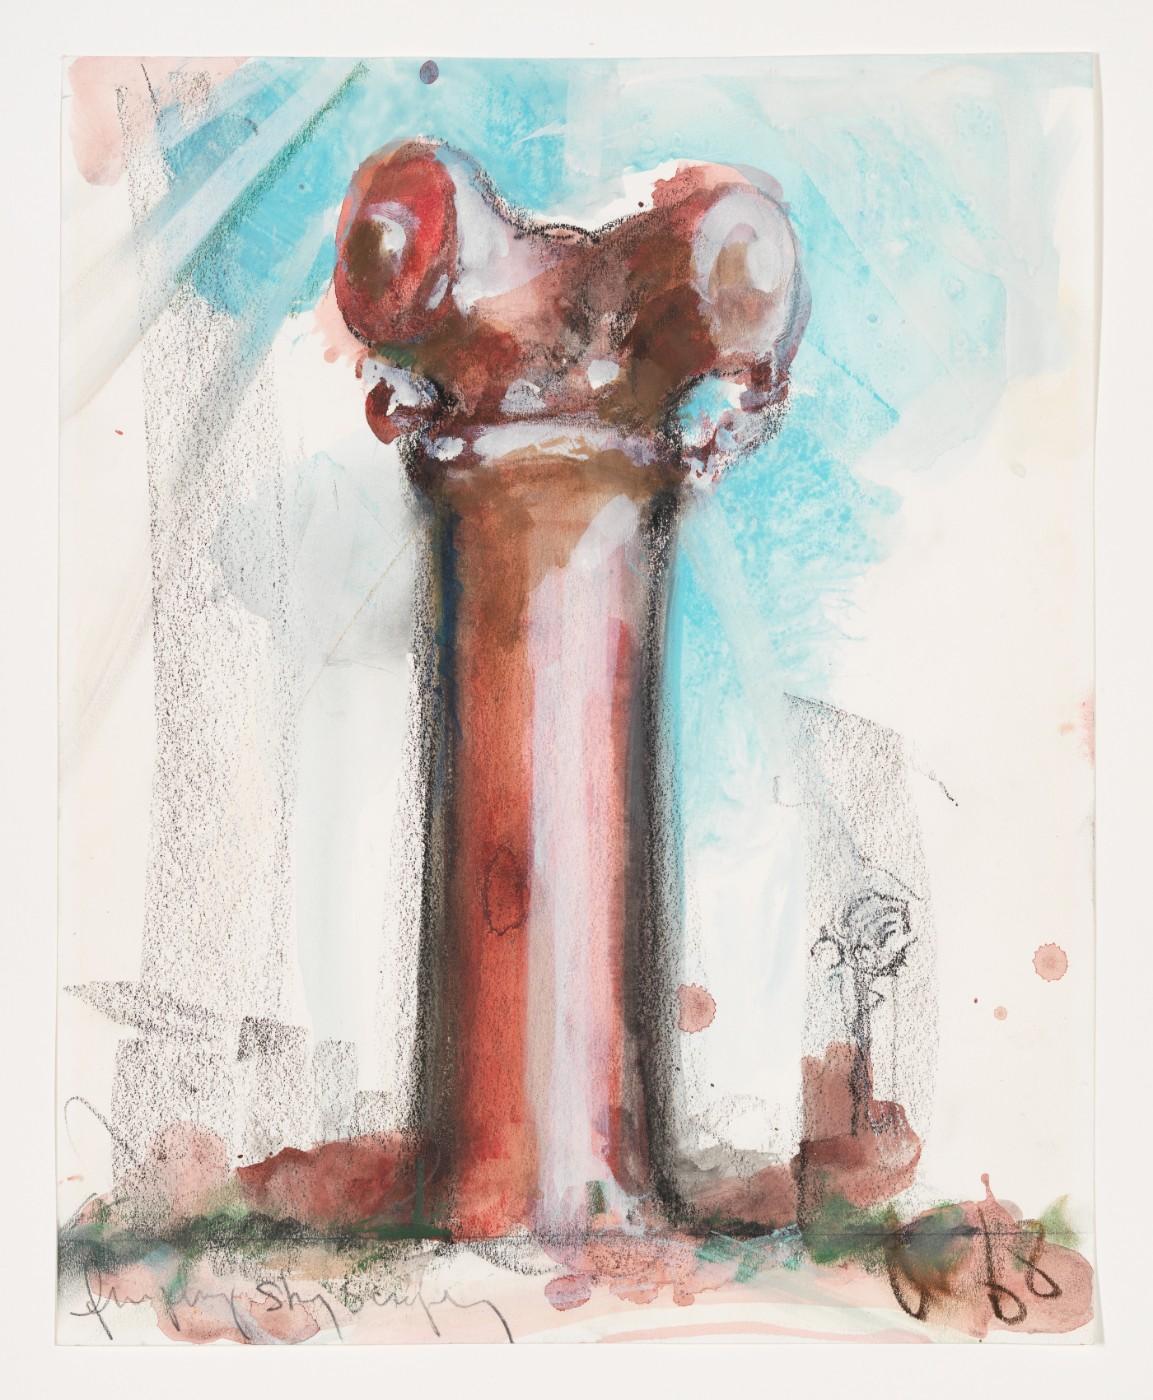 Claes Oldenburg, Proposal for a Skyscraper in the Form of a Chicago Fireplug, 1968